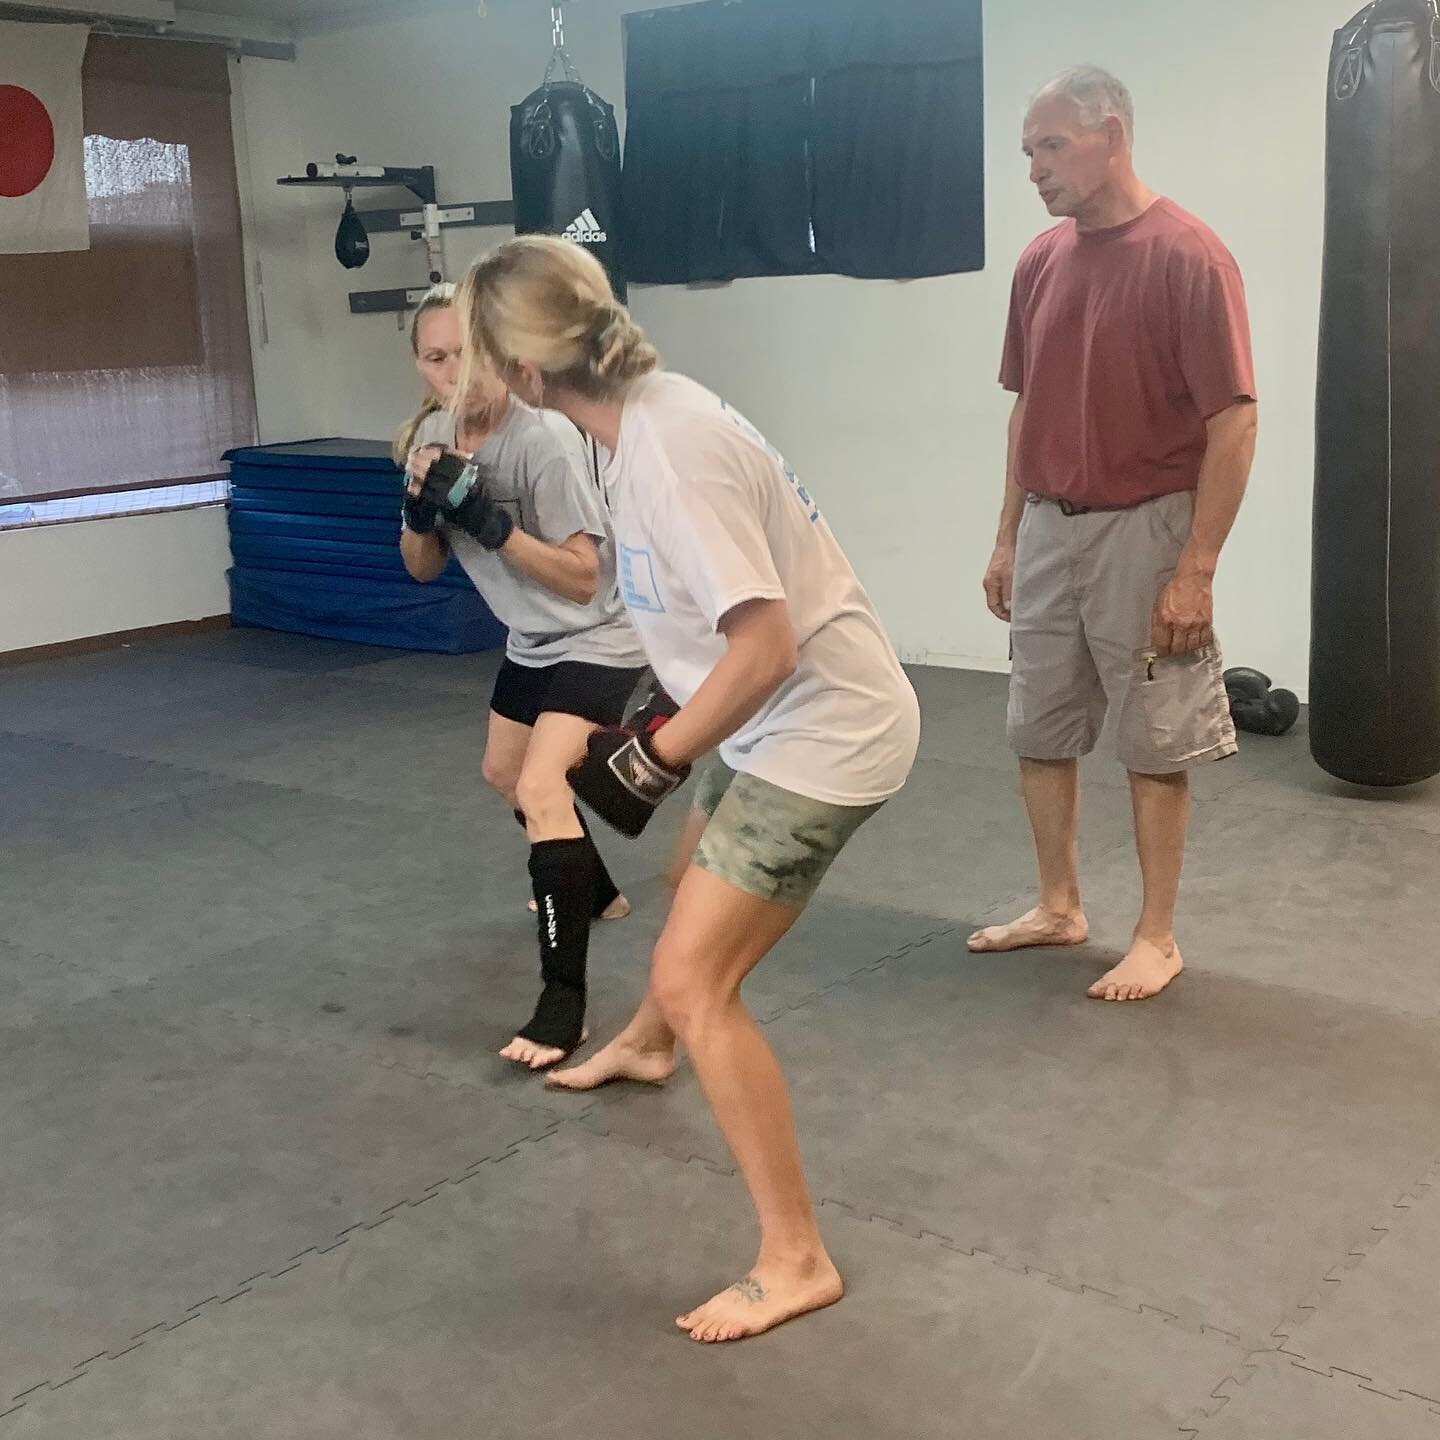 An evening of sparring practice at the dojo! 🥊 

Interested in our classes? Send us a DM or contact us at steelcityselfdefense@gmail.com! 🥊 

#steelcityselfdefense #pueblo #pueblocolorado #puebloshares #selfdefense #selfdefensepueblo #selfdefensecl